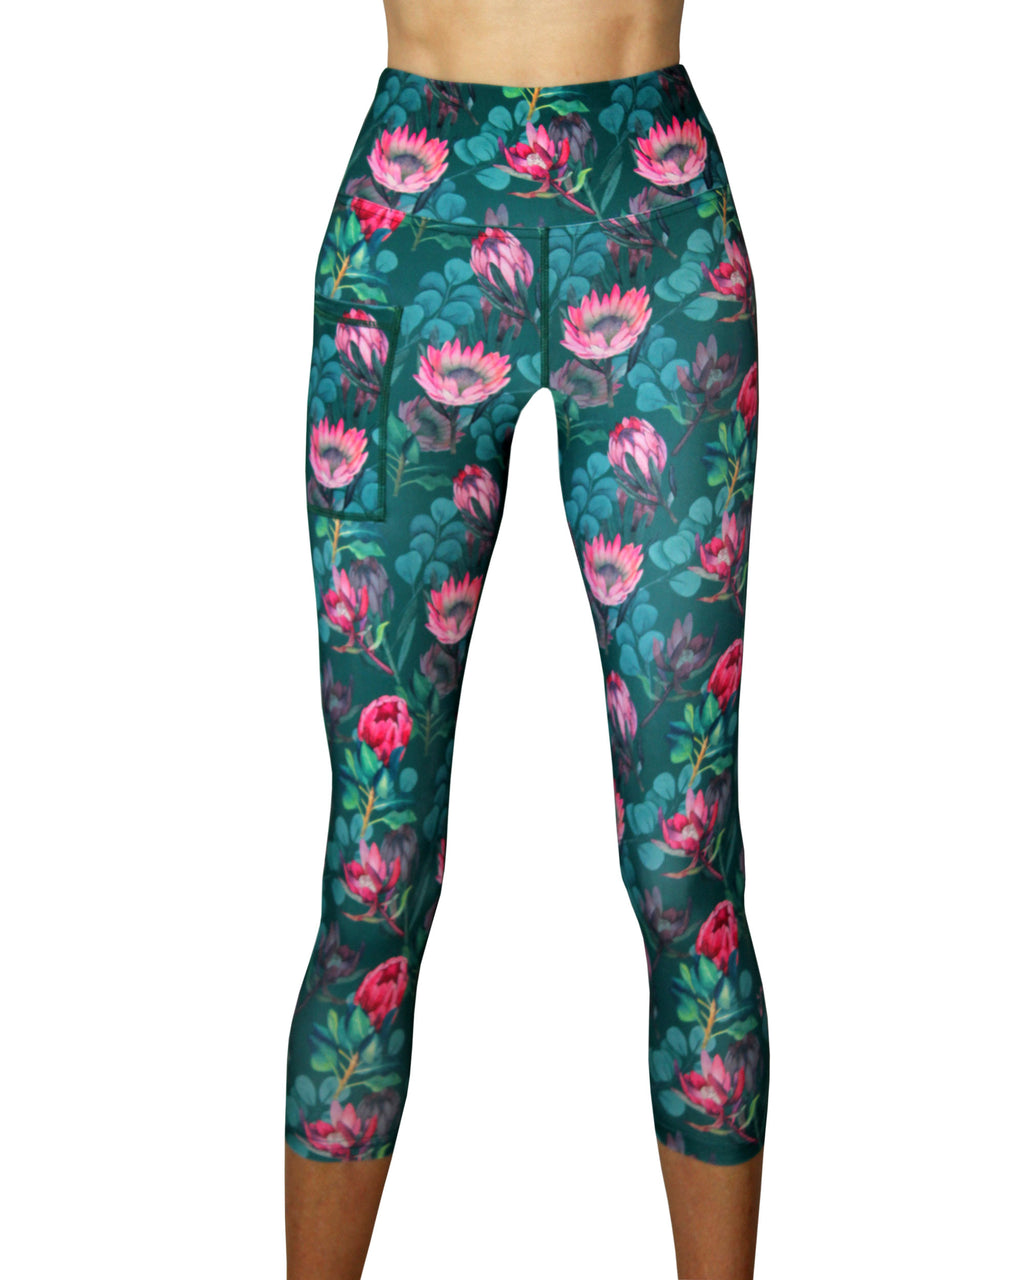 Vivolicious three quarter leggings with a beautiful protea design.  Made in Cape Town, South Africa.  These leggings have a high waistband, a cellphone pocket, a double lined gusset and an inside waist tie.  Perfect for running, gym workouts, and wearing as a yoga outfit.